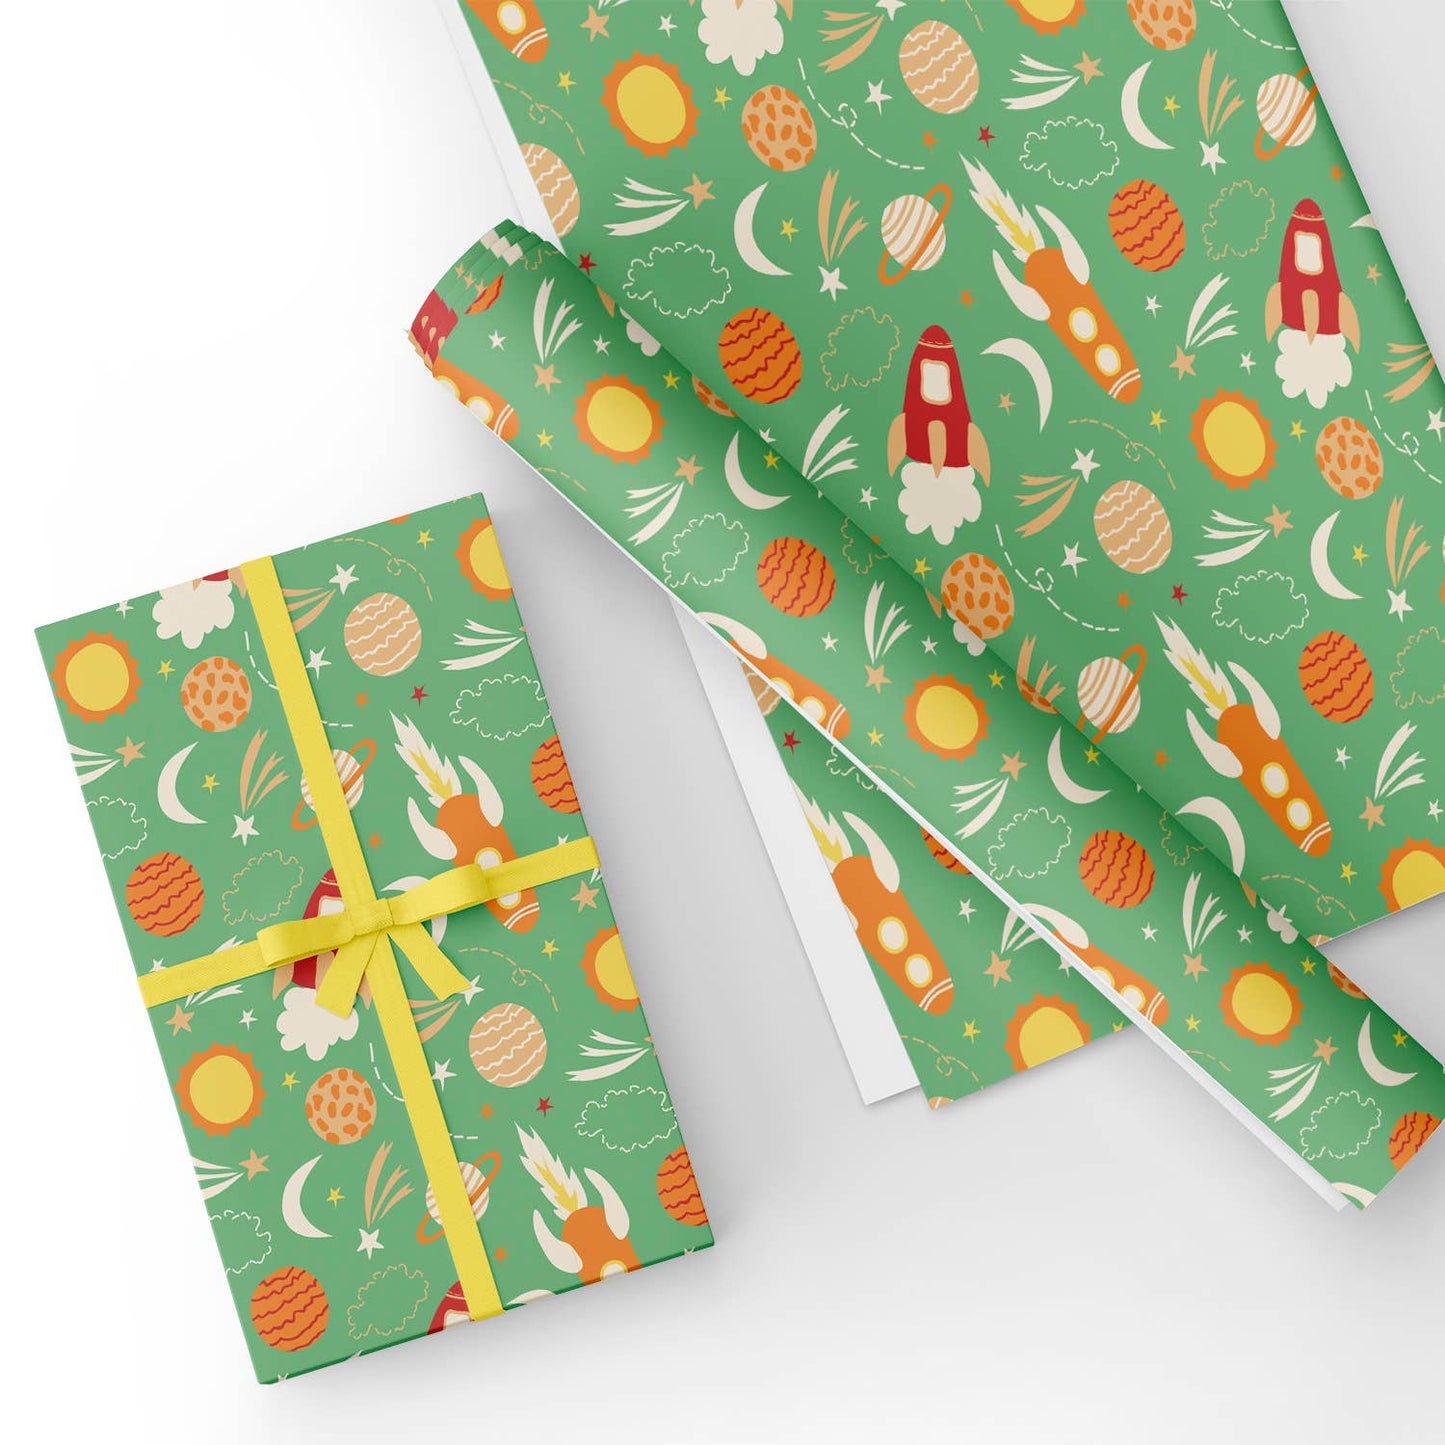 Space Rockets Flat Wrapping Paper Sheet Wholesale Wraphaholic